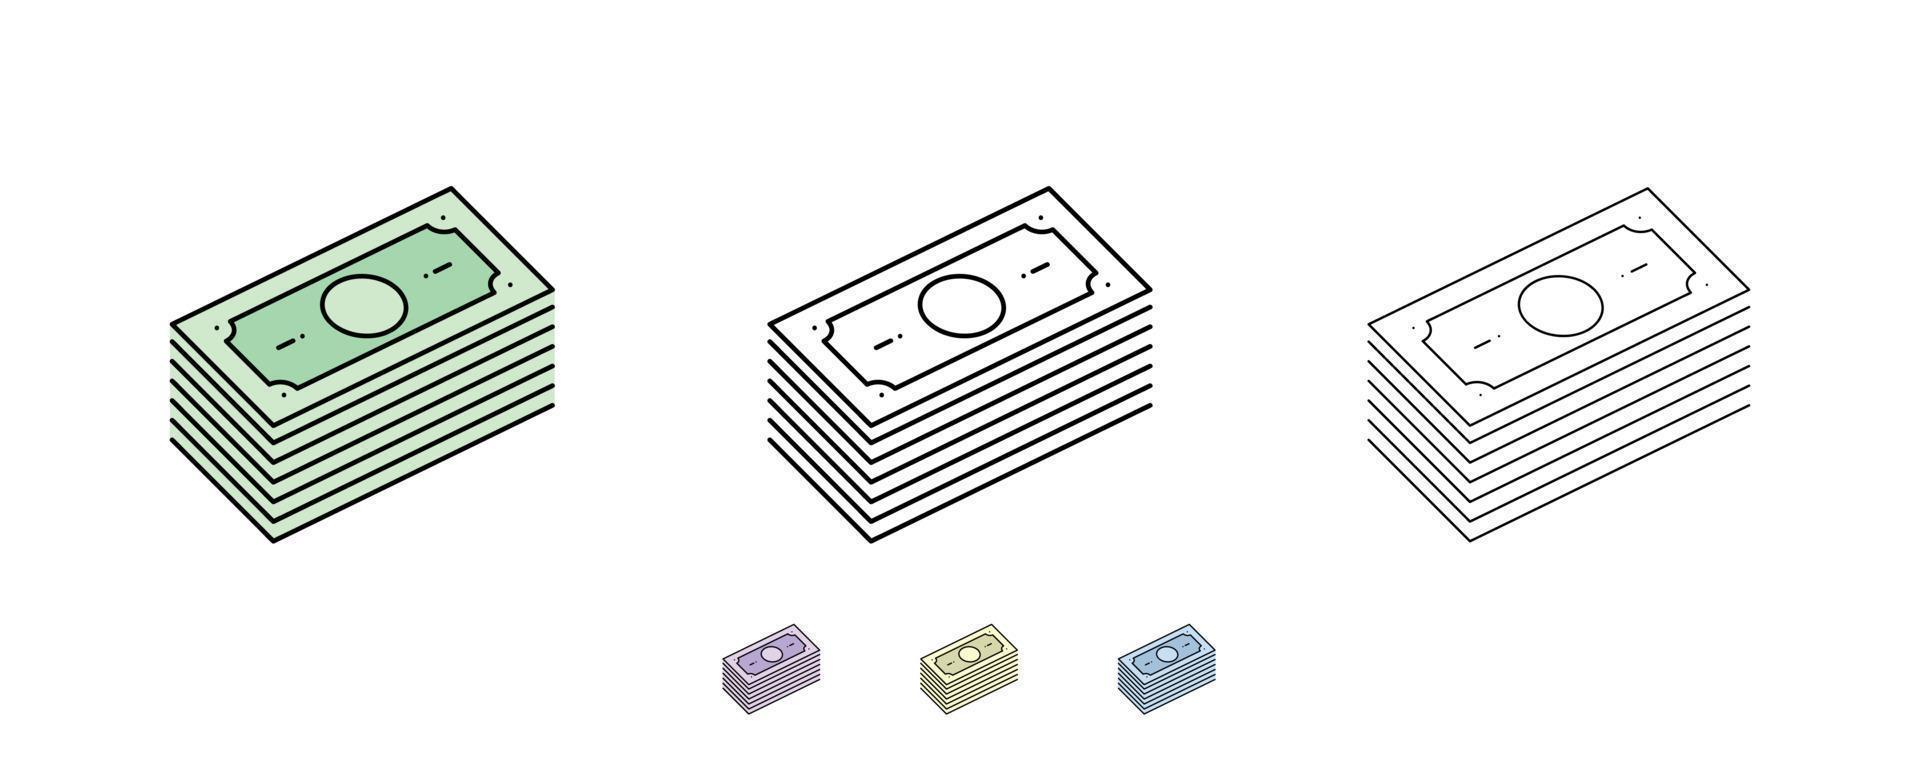 It is used in web and designs in areas such as money transfer, withdrawal and deposit. Paper money icon. Alternatively, different colors have been added. Symbols of different thickness. vector